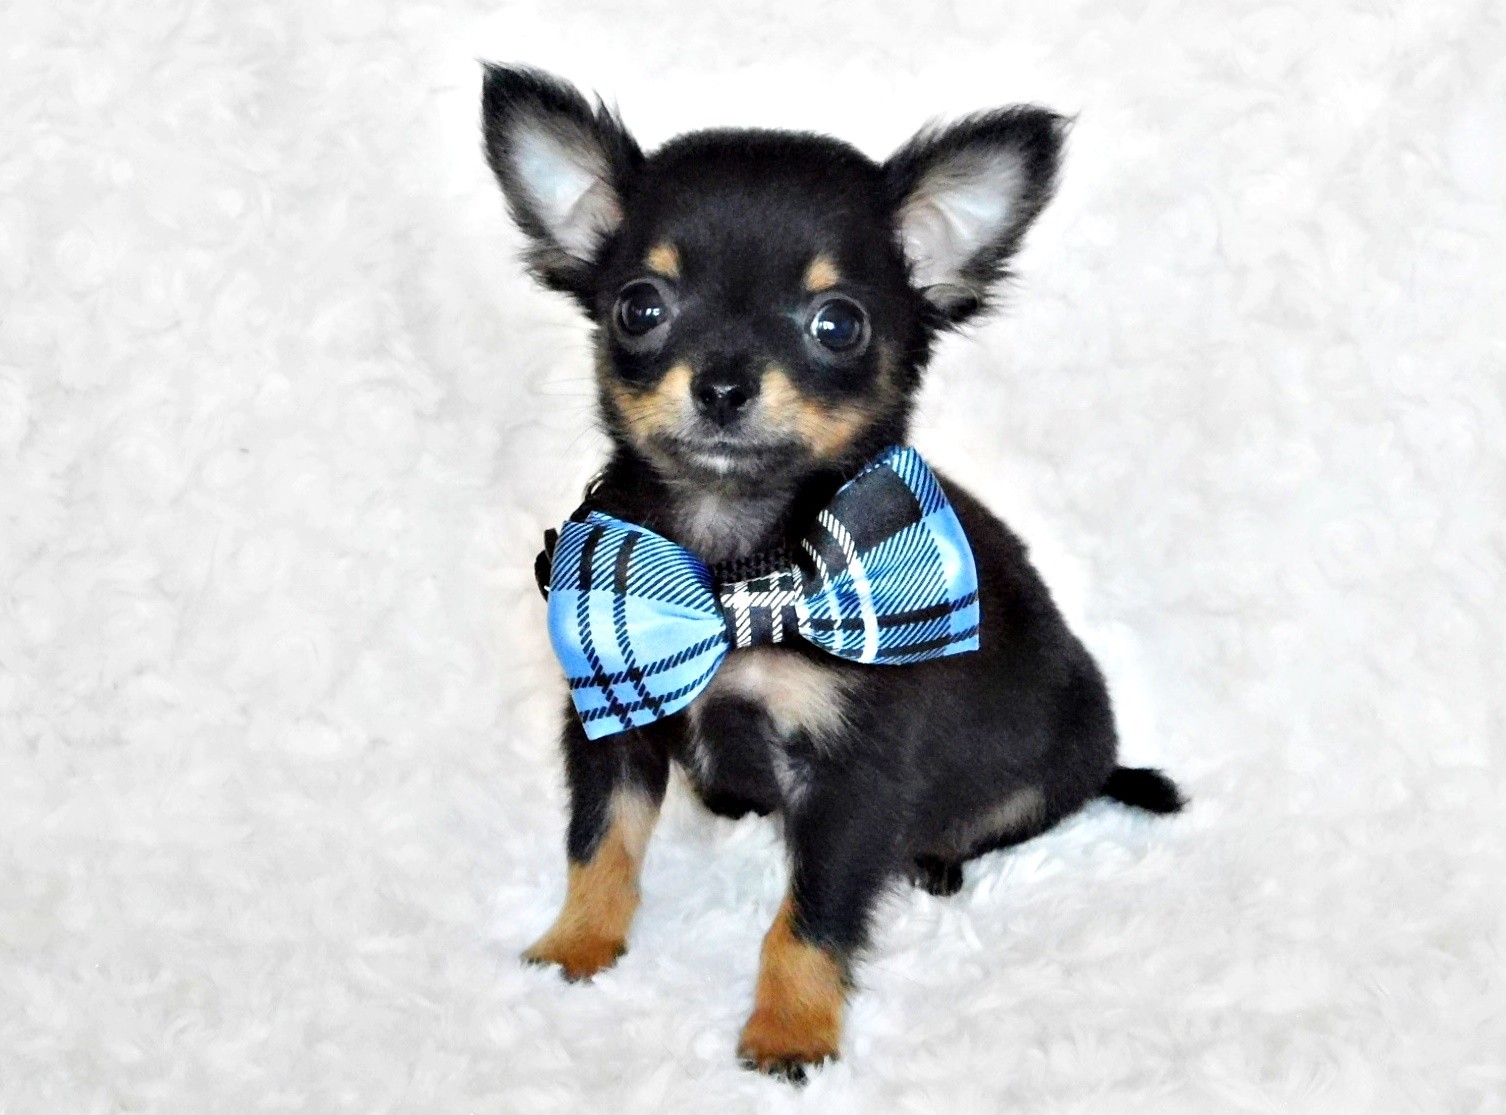 Small black and tan long coat puppy wearning a blue bowtie sitting on a white fuzzy background.